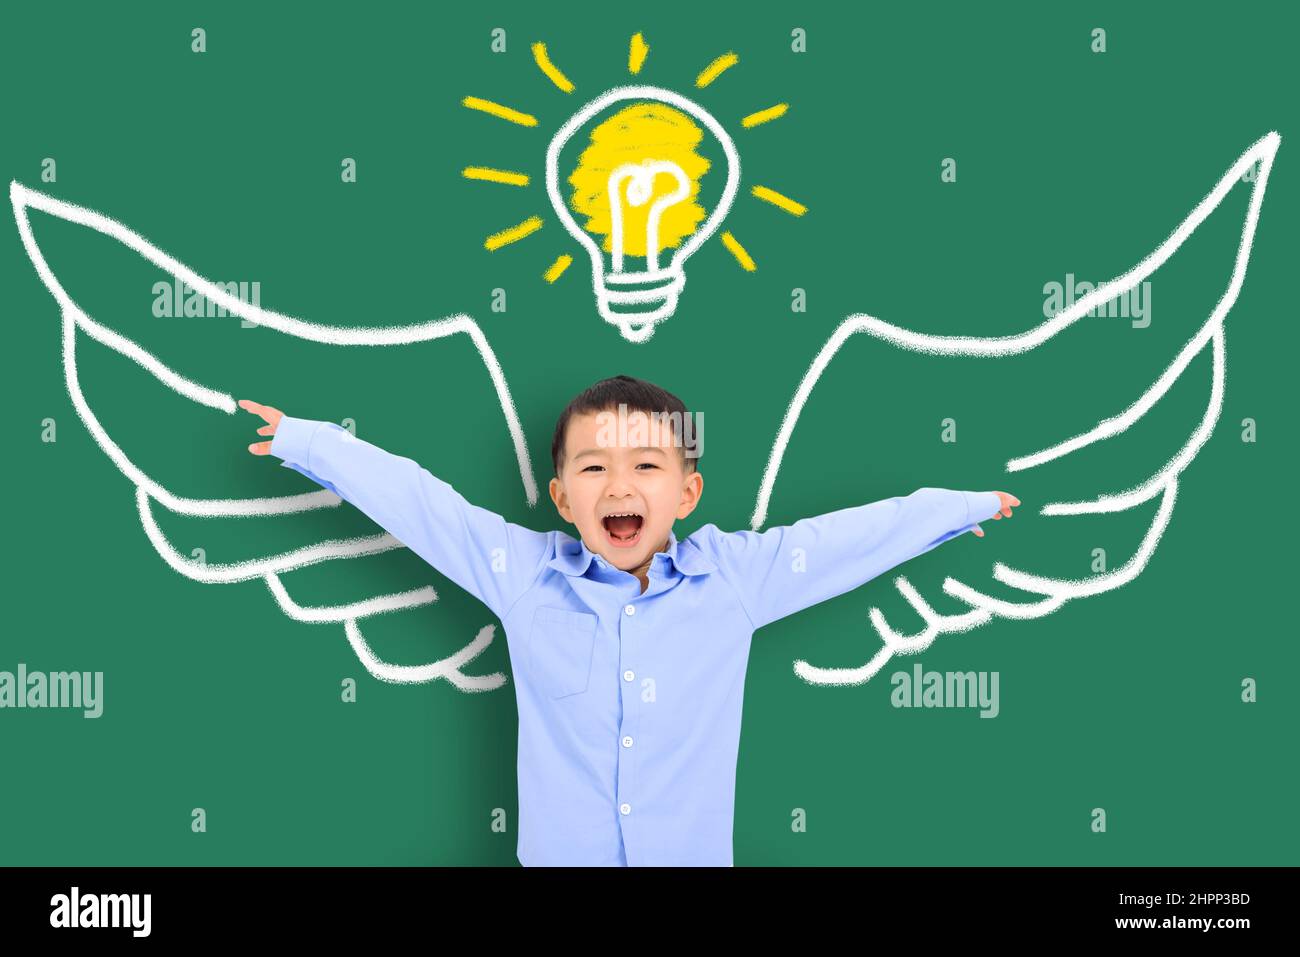 Smart kid with wing in class. Imagination, idea and success concept Stock Photo